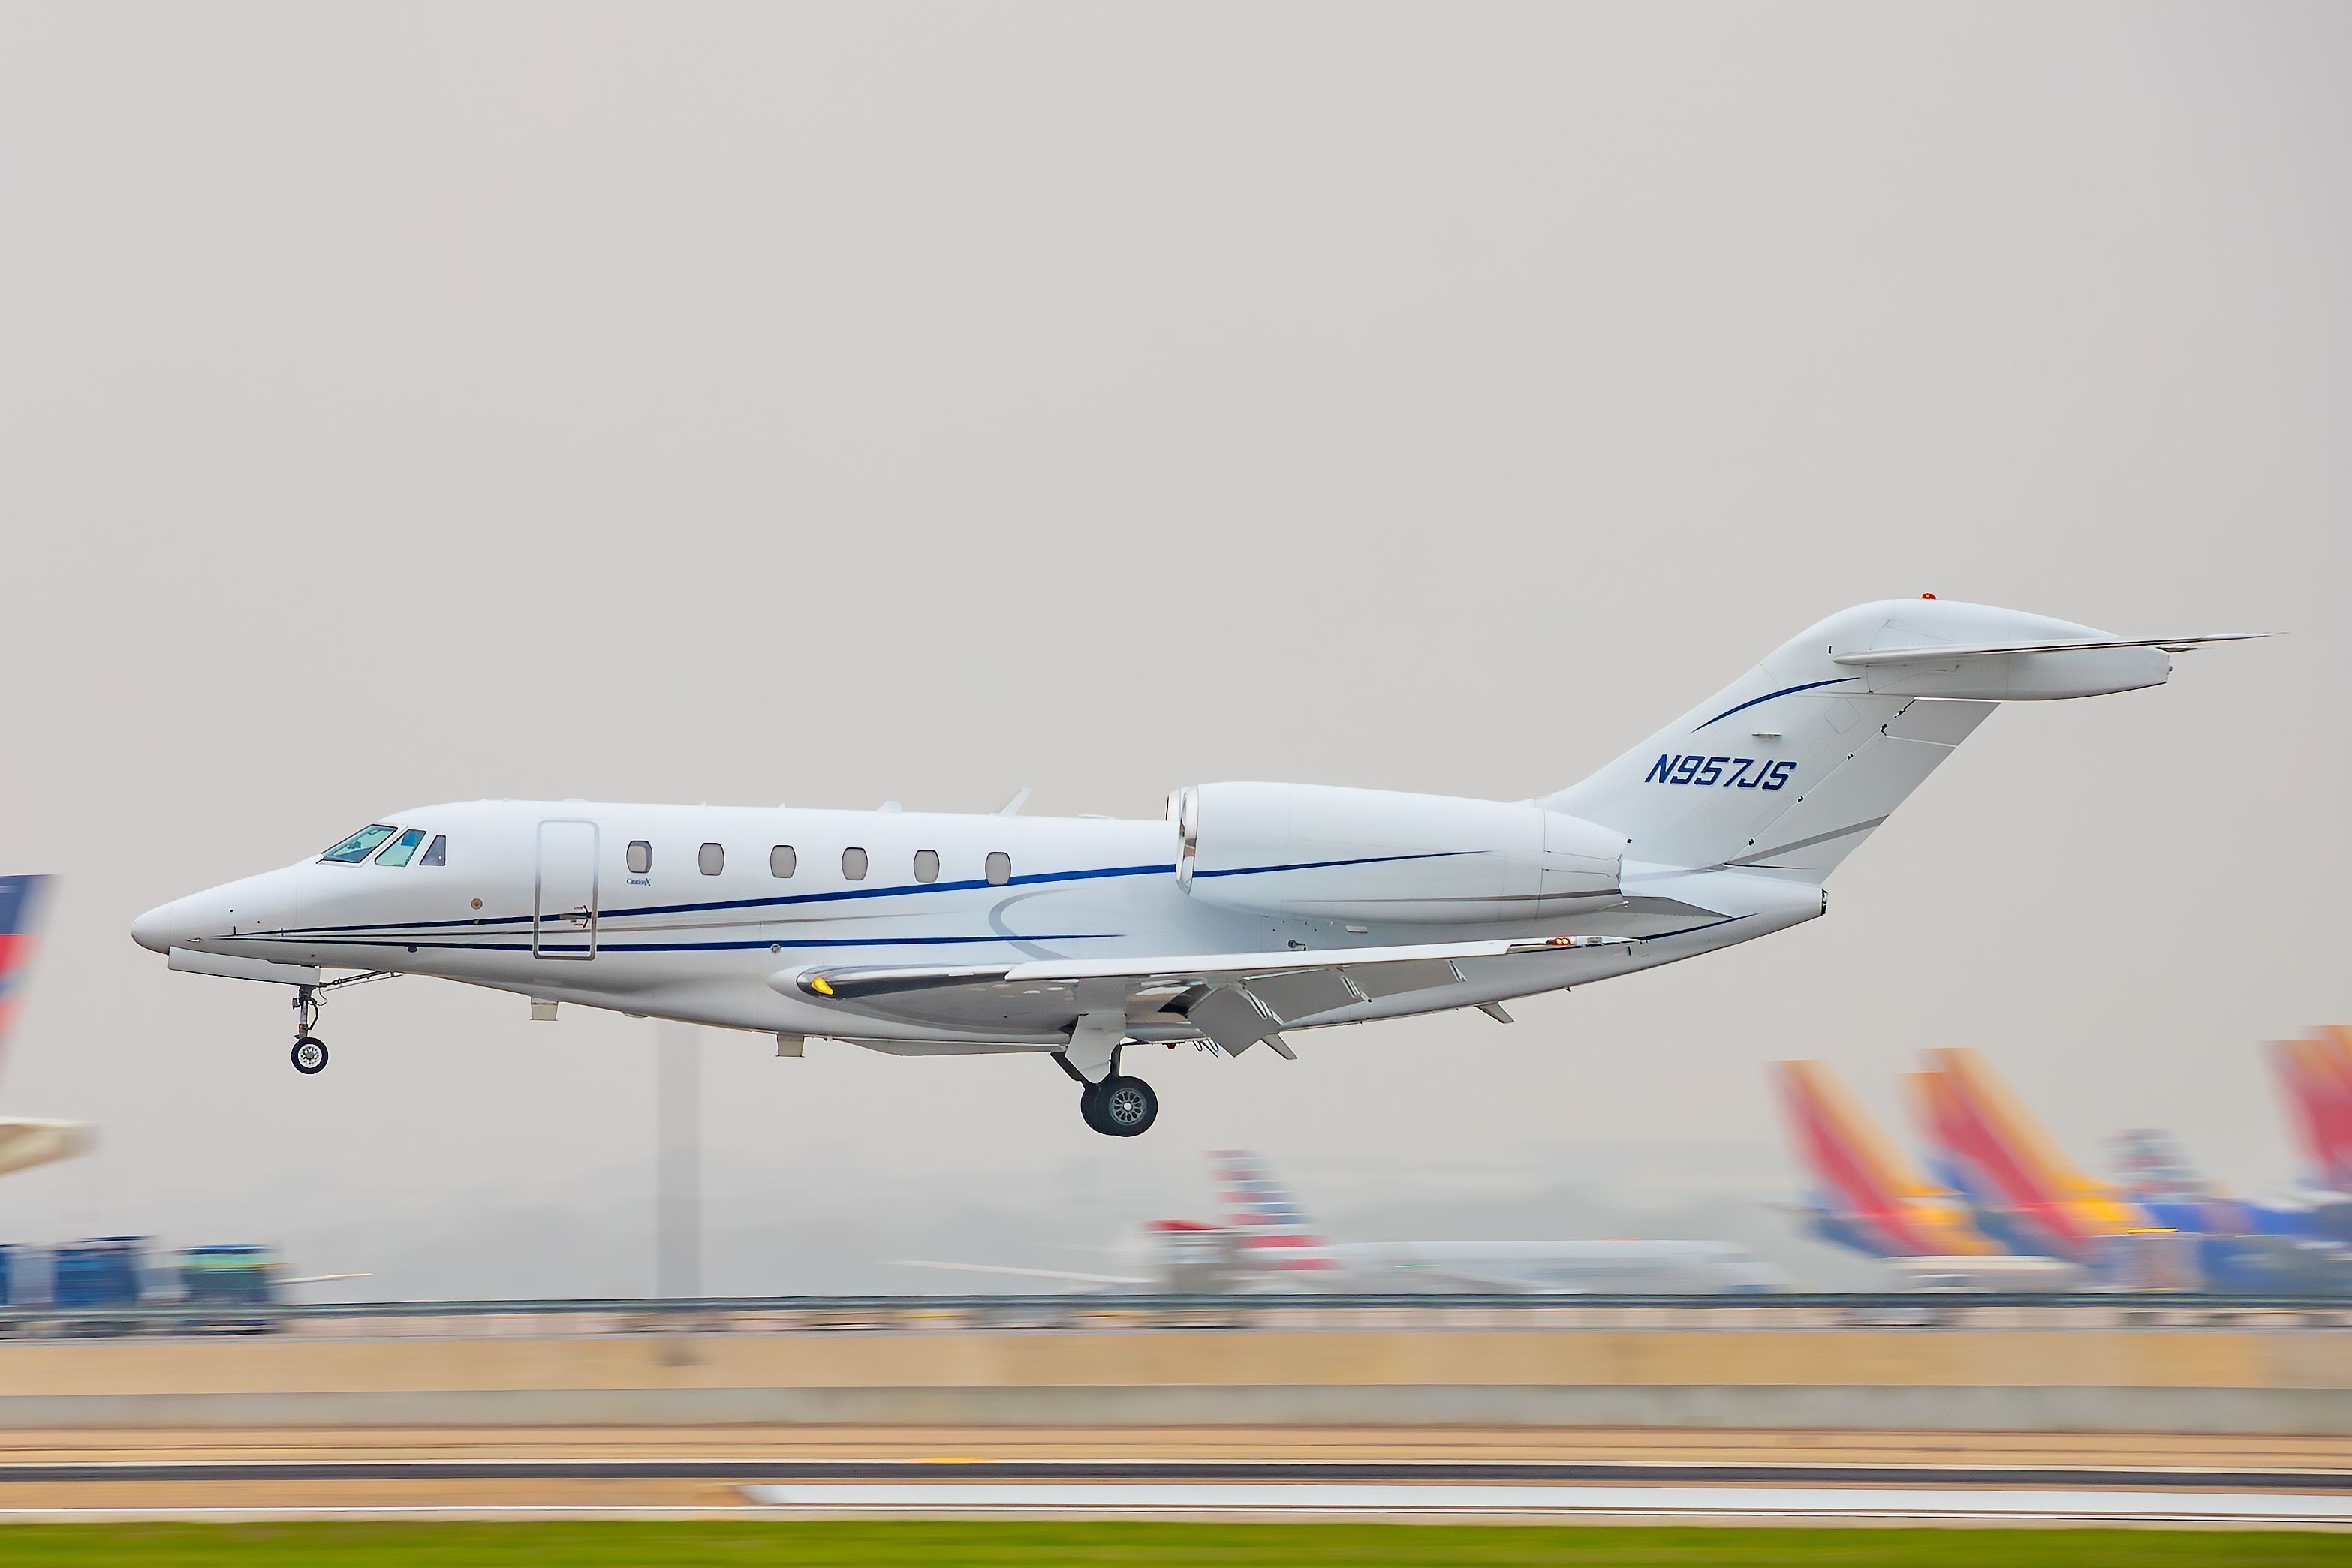 A FlyExclusive Cessna 750 Citation X about to land at Austin-Bergstrom International Airport.